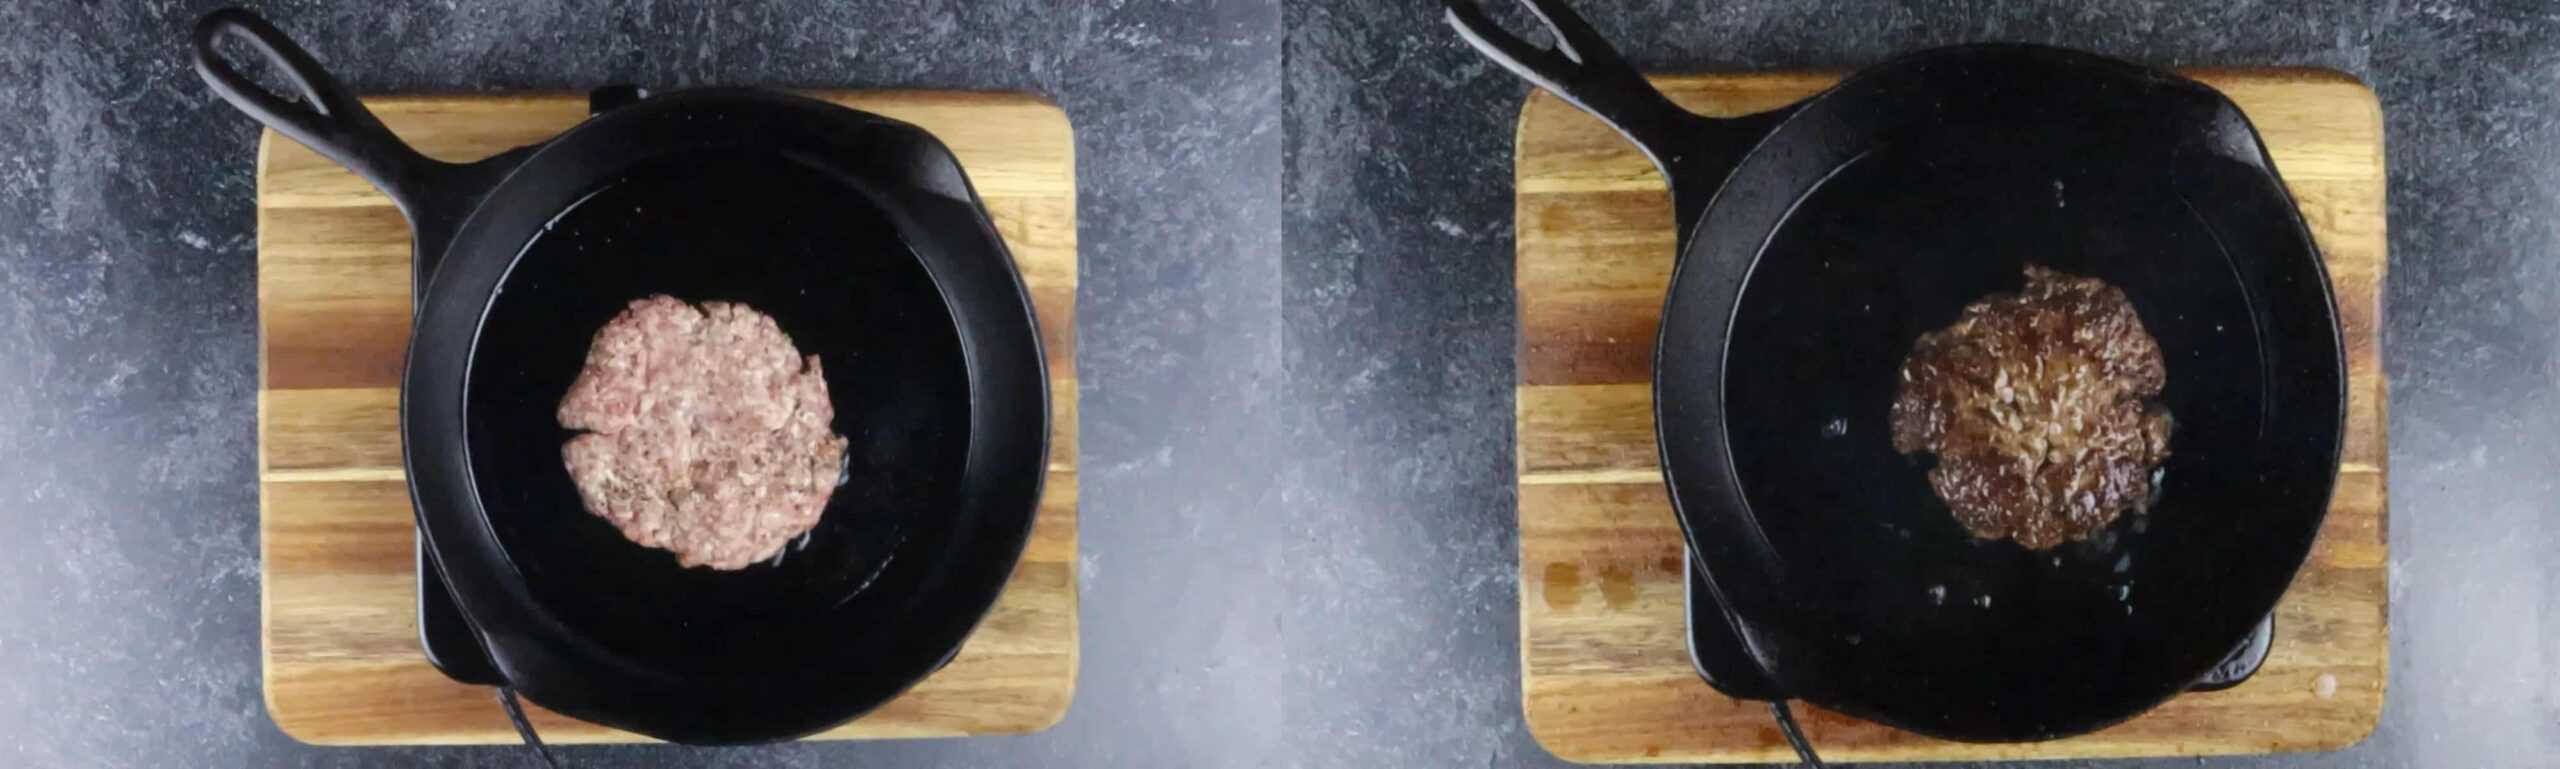  patties in a cast iron skillet uncooked vs cooked